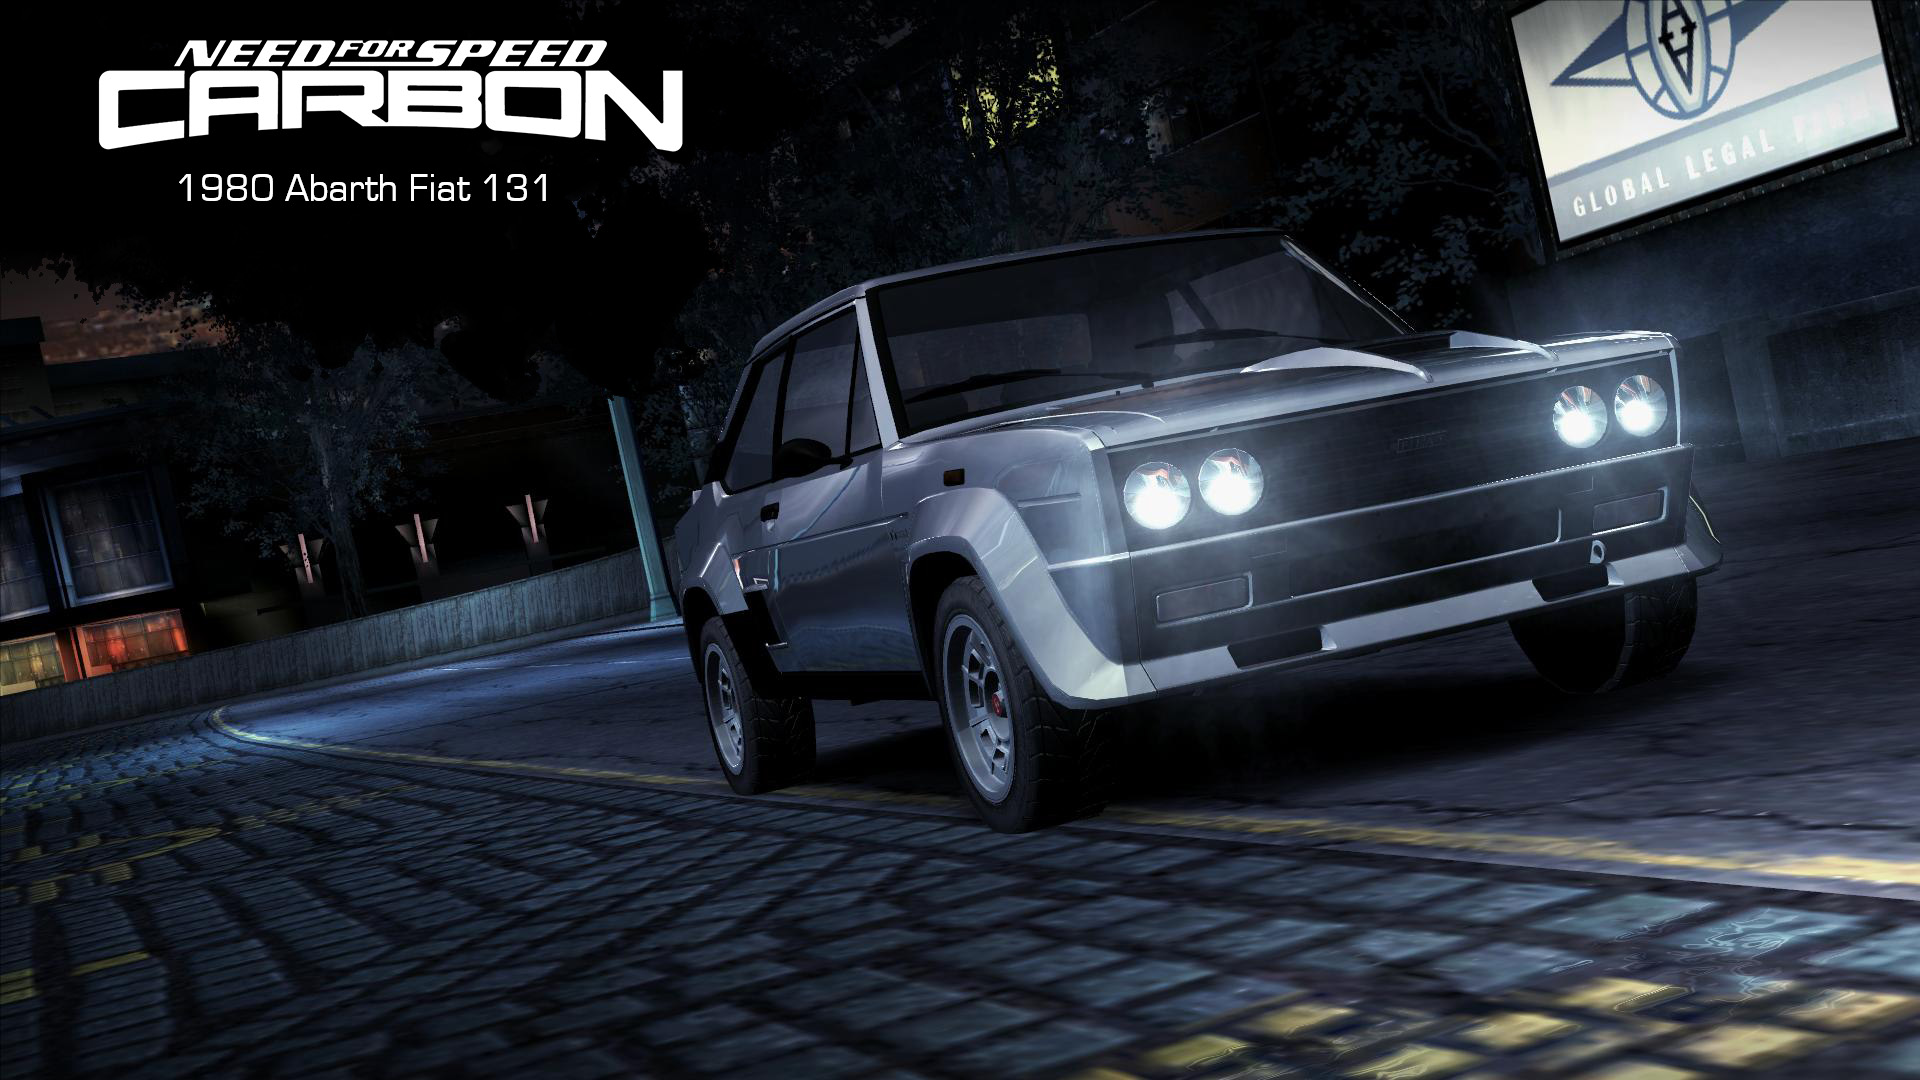 Need For Speed Carbon 1980 Abarth Fiat 131 [Add-On]